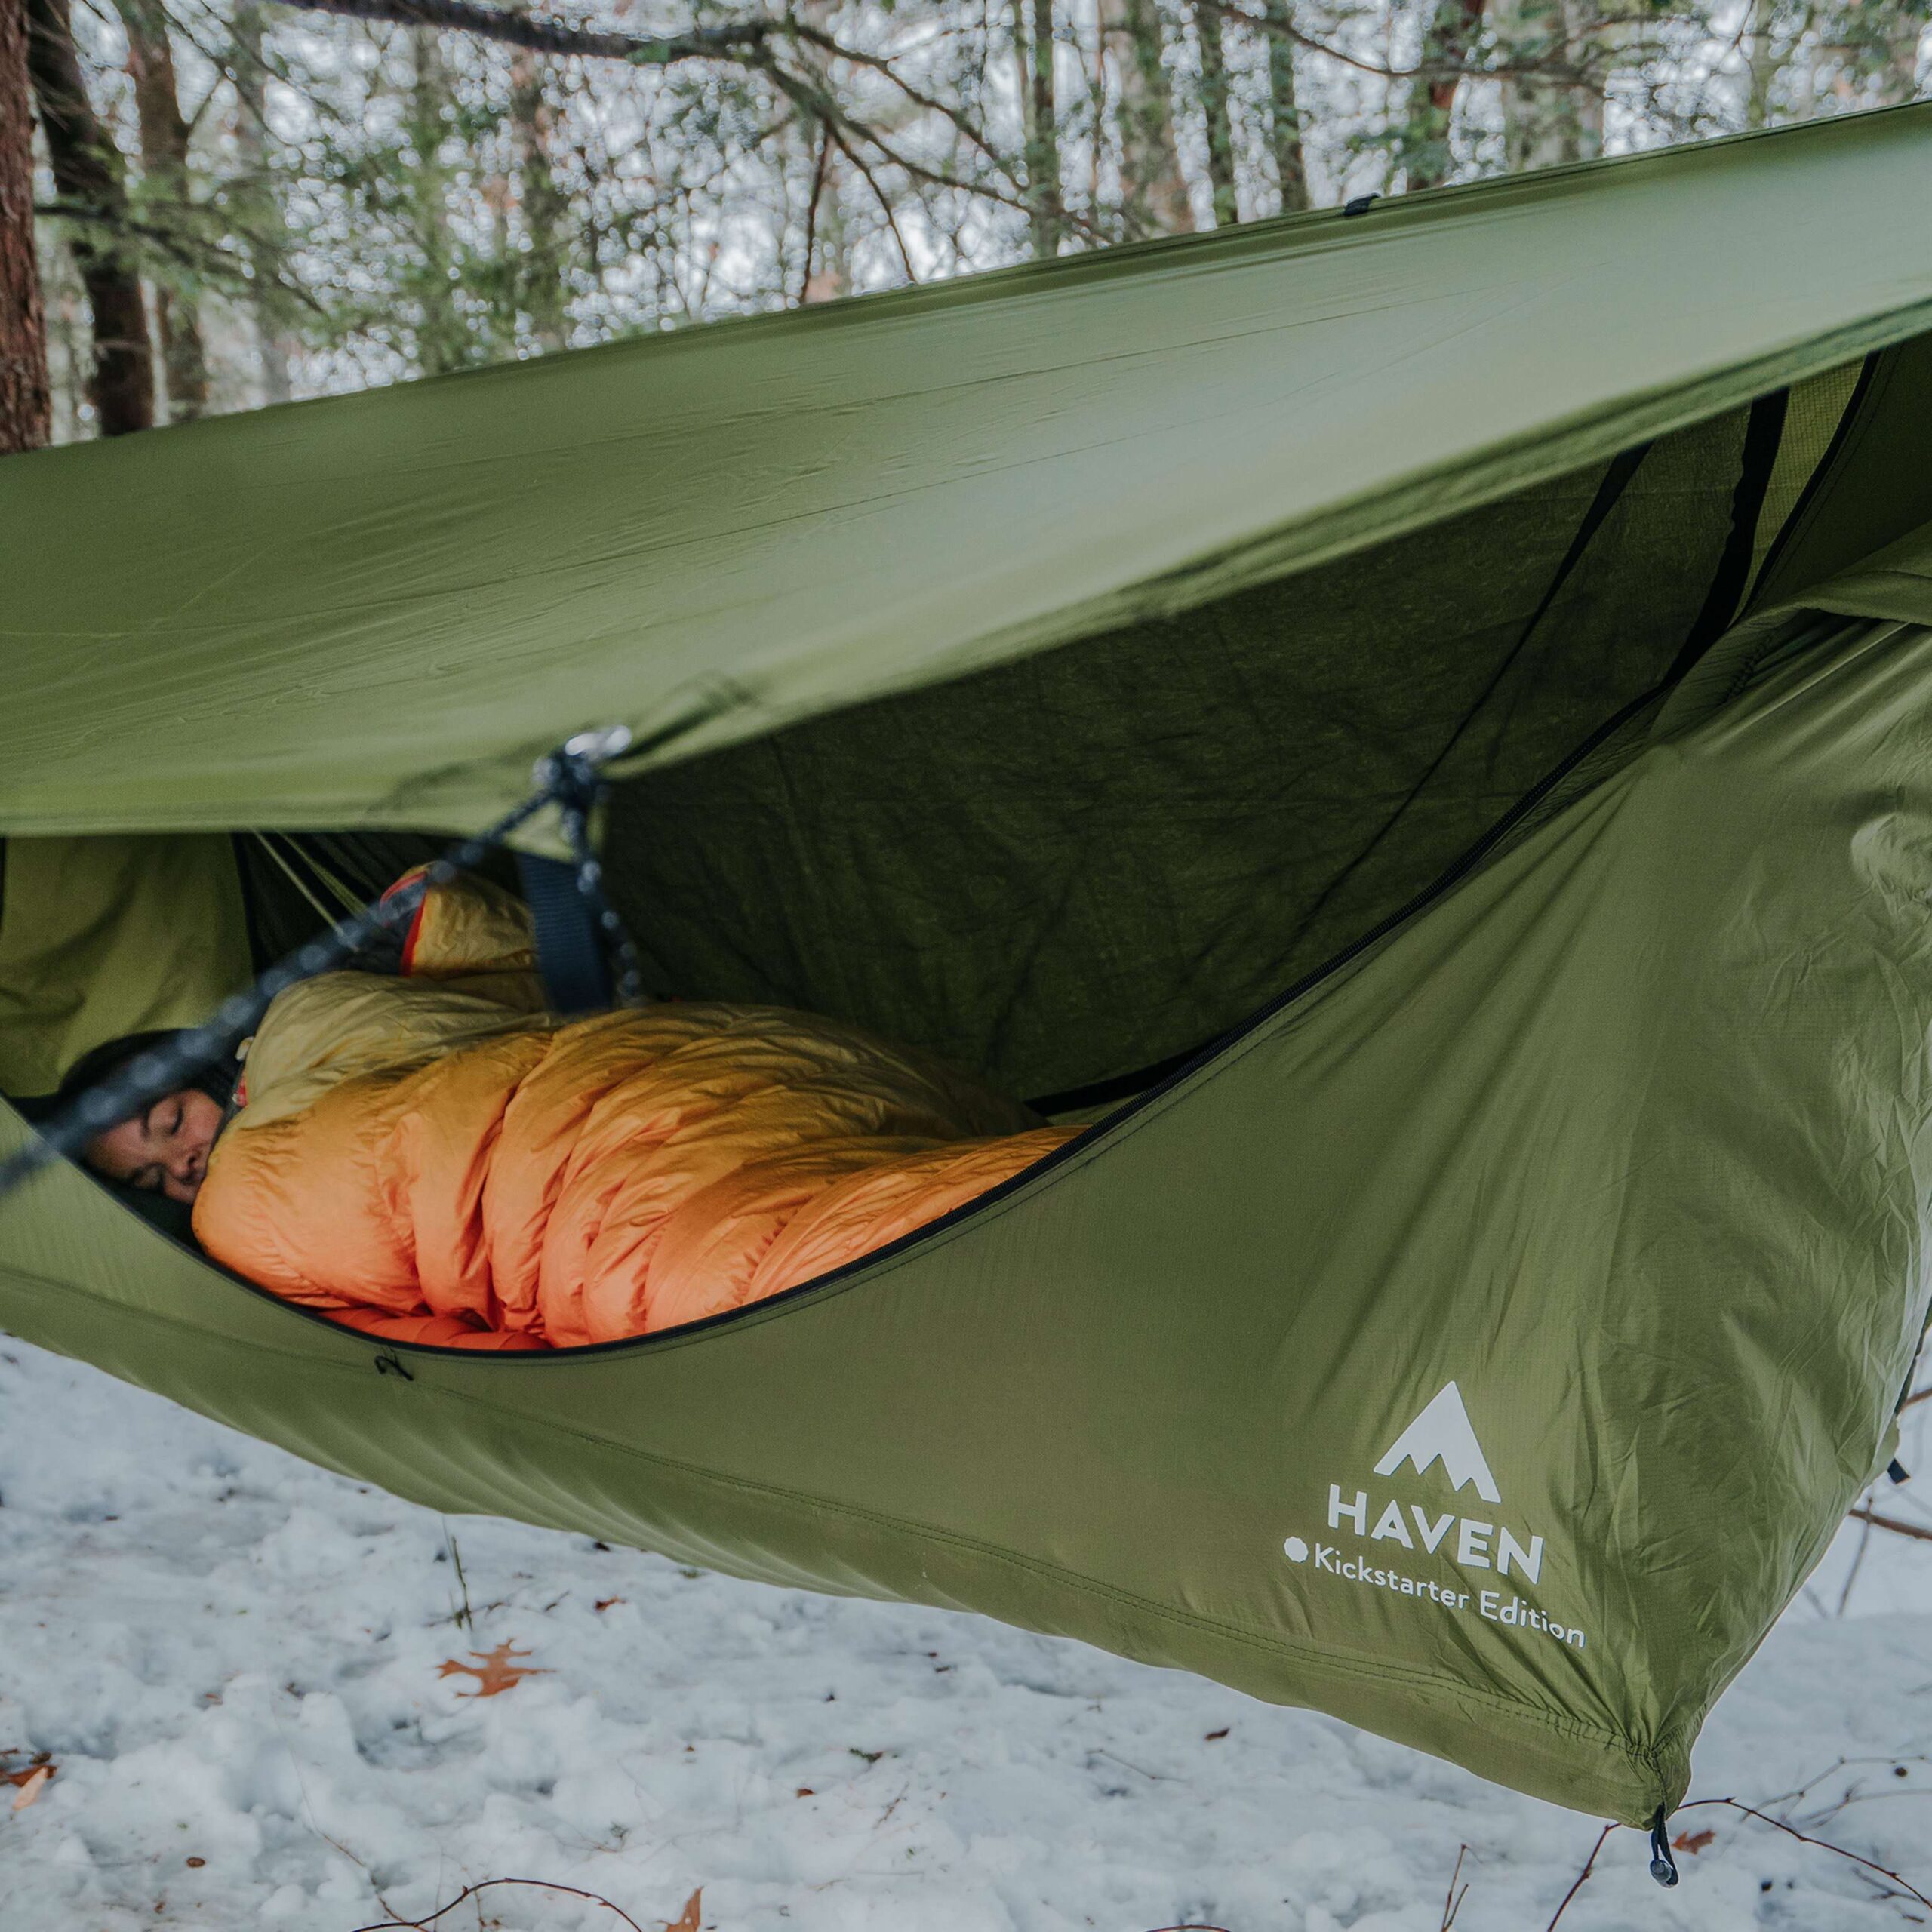 The Haven Tent: An Unusual Lay-Flat Hammock Tent